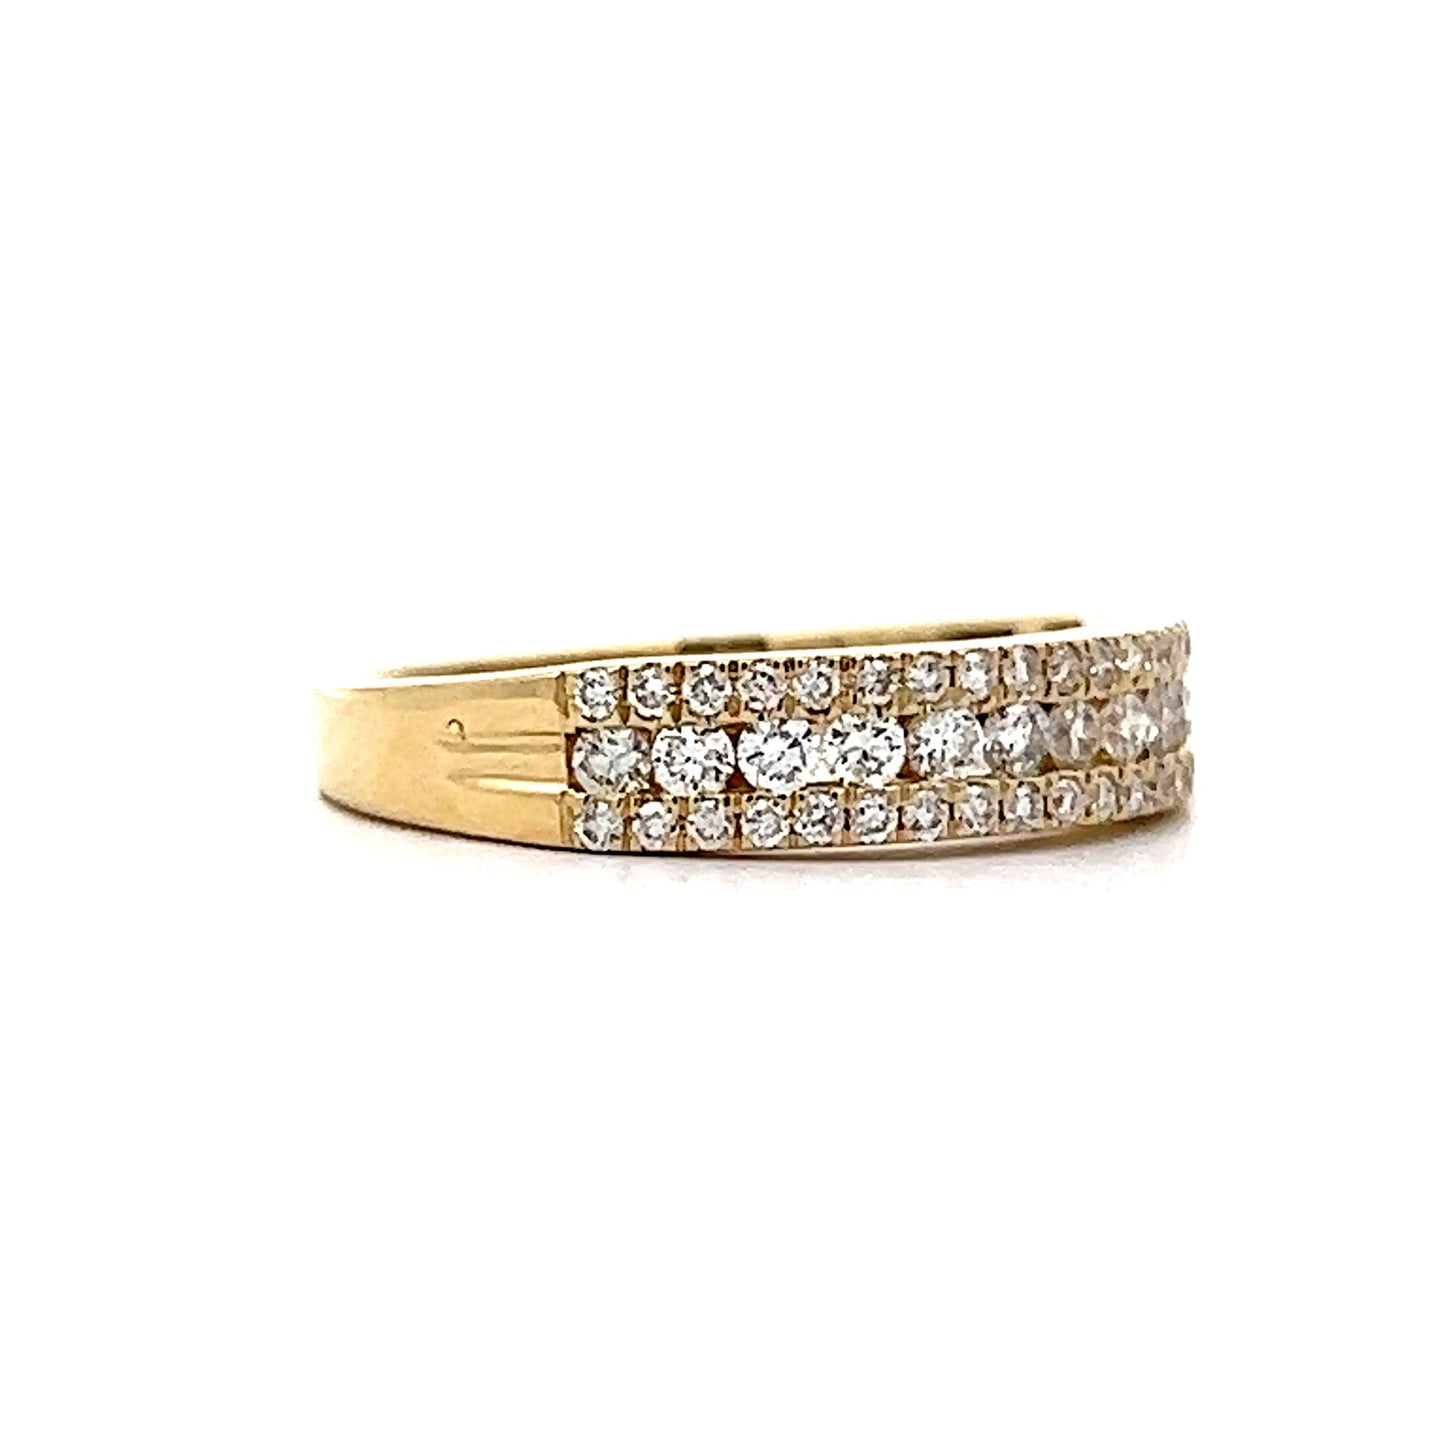 Stacked Pave Diamond Cocktail Ring 14k Yellow Gold